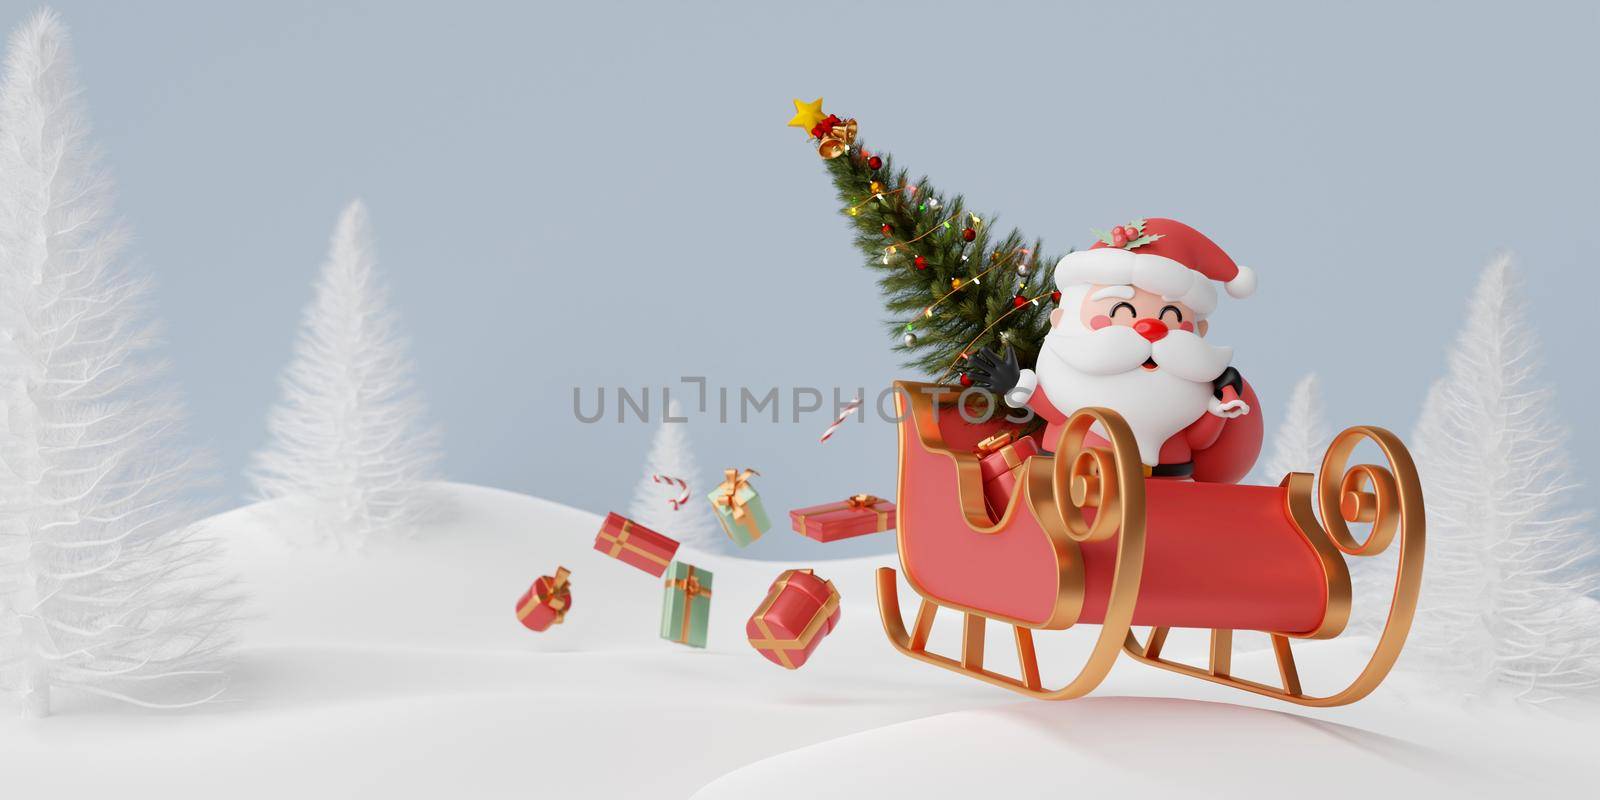 Santa Claus on sleigh with Christmas gift in pine forest, Merry Christmas, 3d illustration by nutzchotwarut